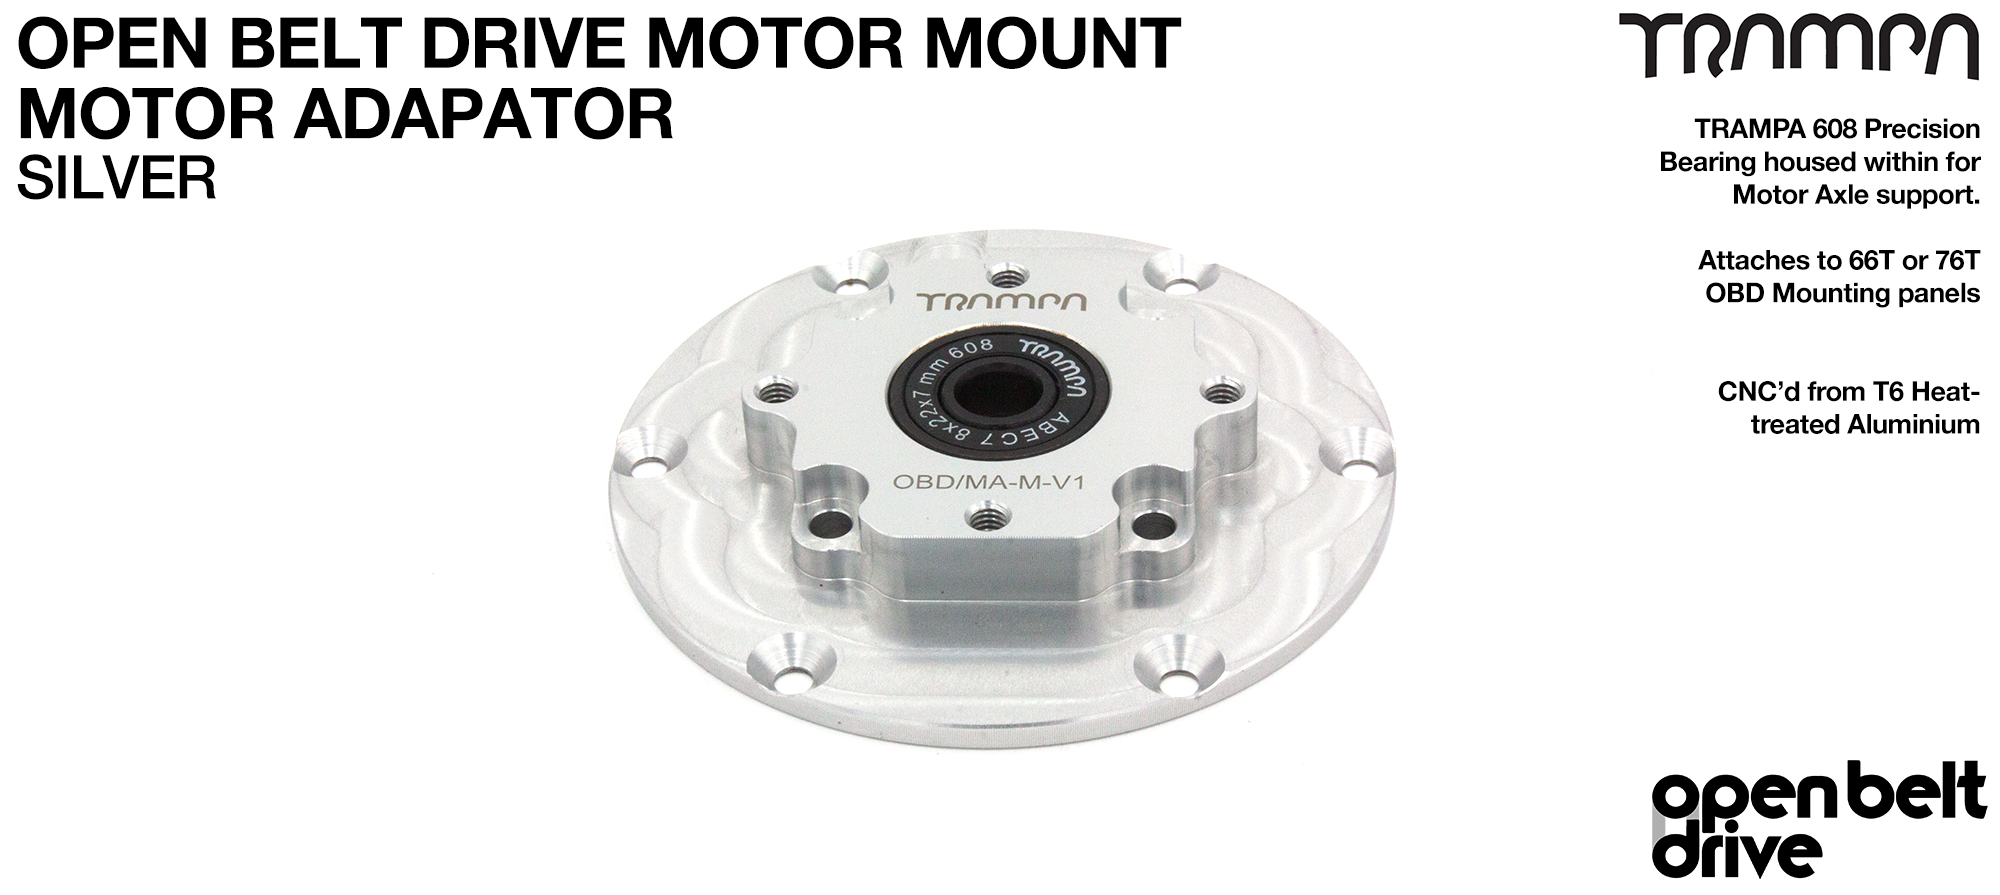 OBD Motor Adaptor with Housed Bearing - SILVER